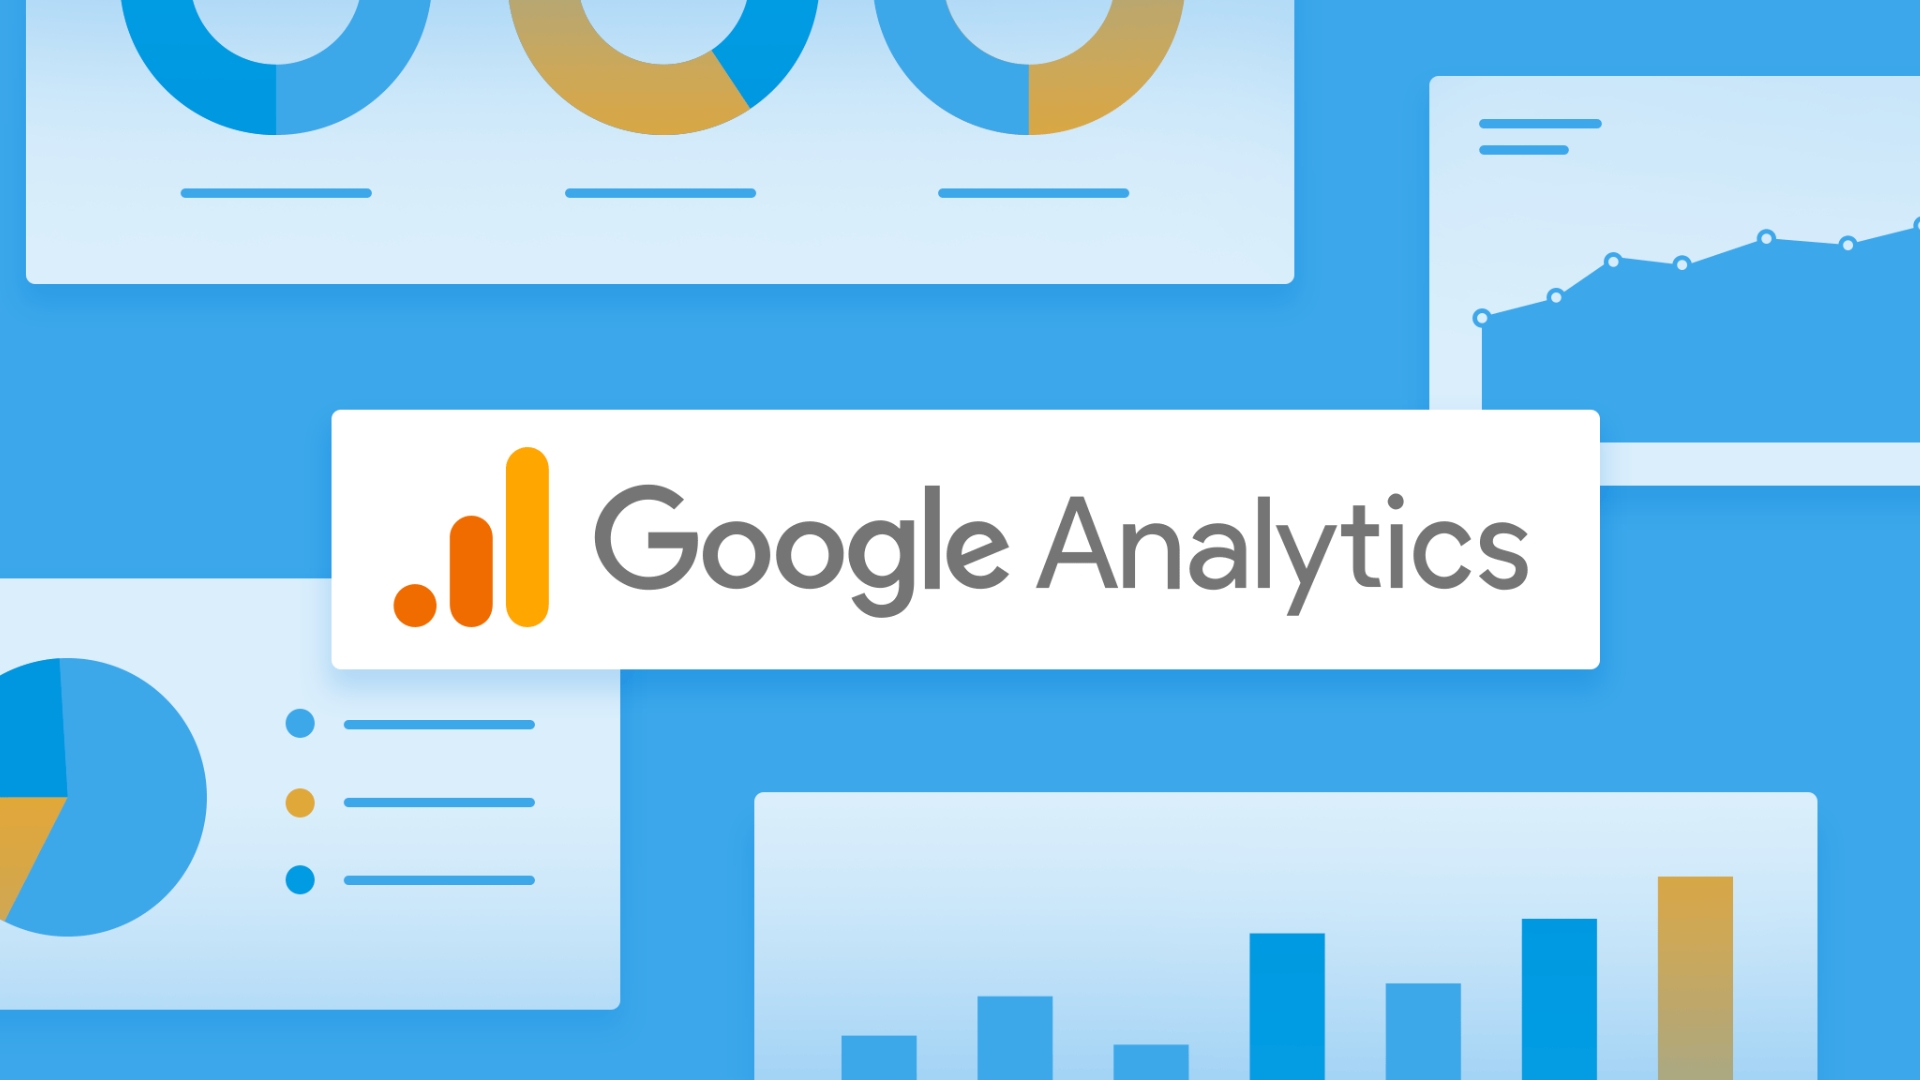 google analytics setup service logo in the middle and analytic element around it with blue background